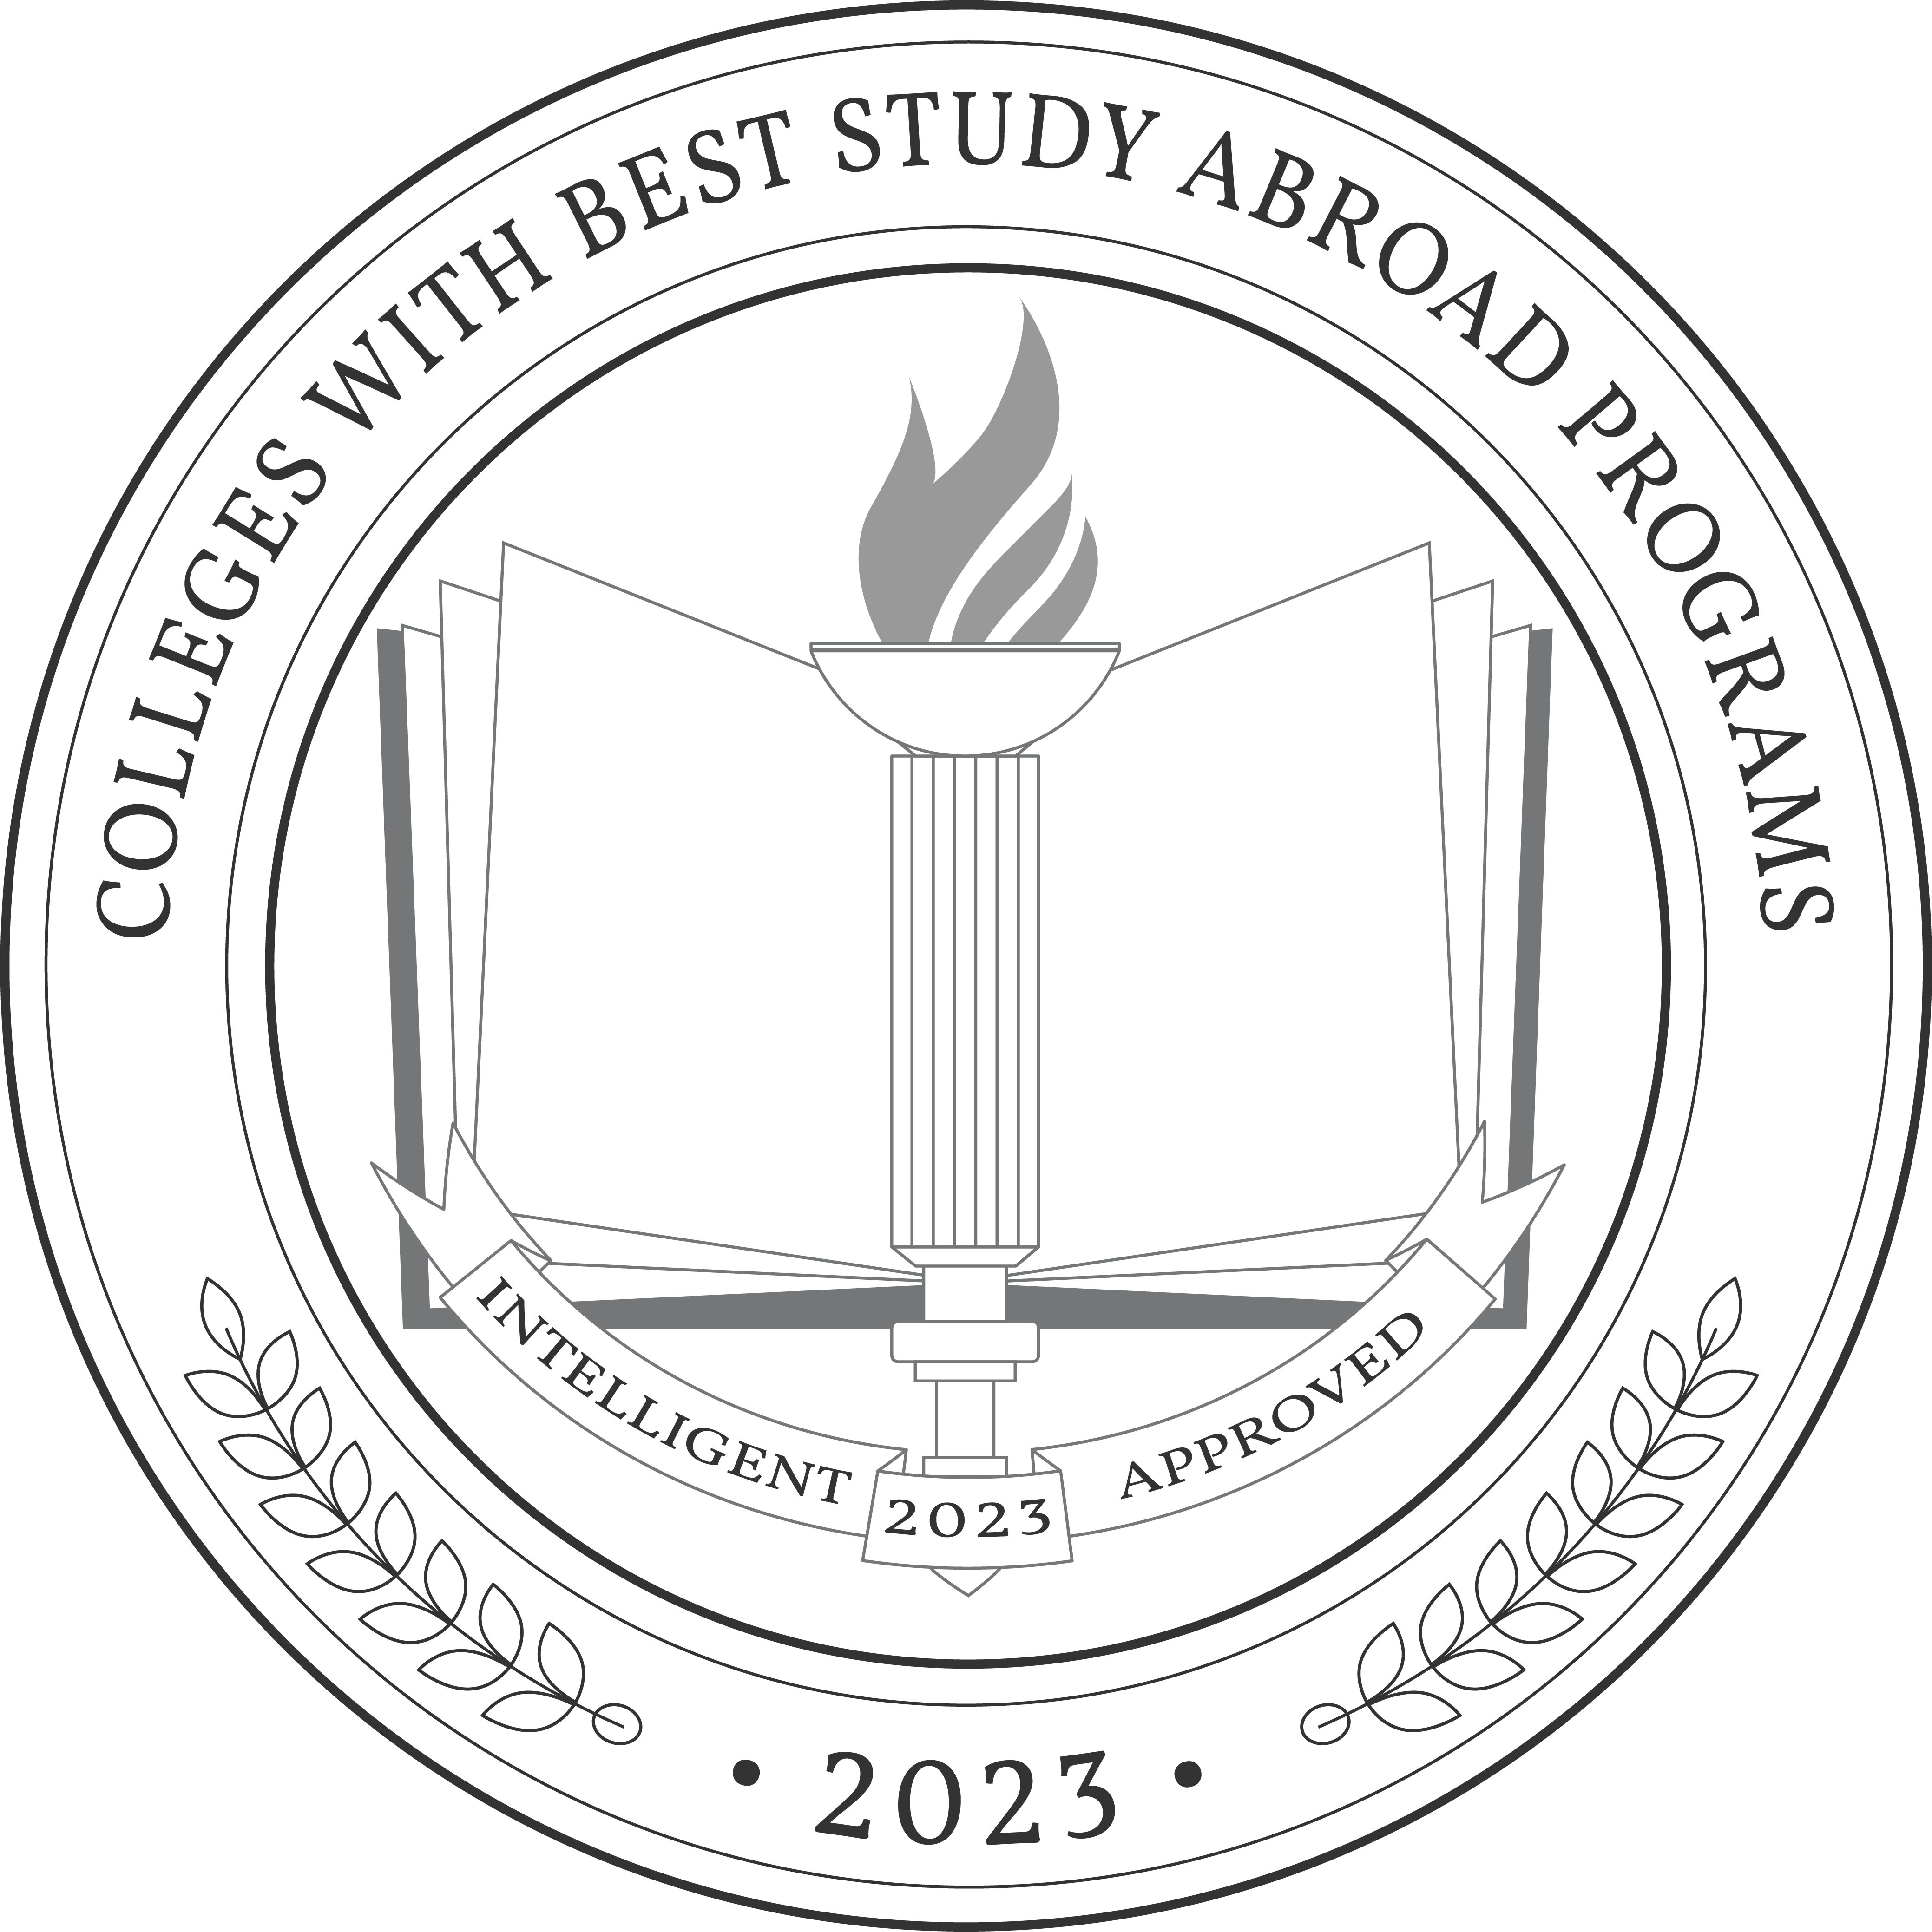 Colleges With Best Study Abroad Programs Badge